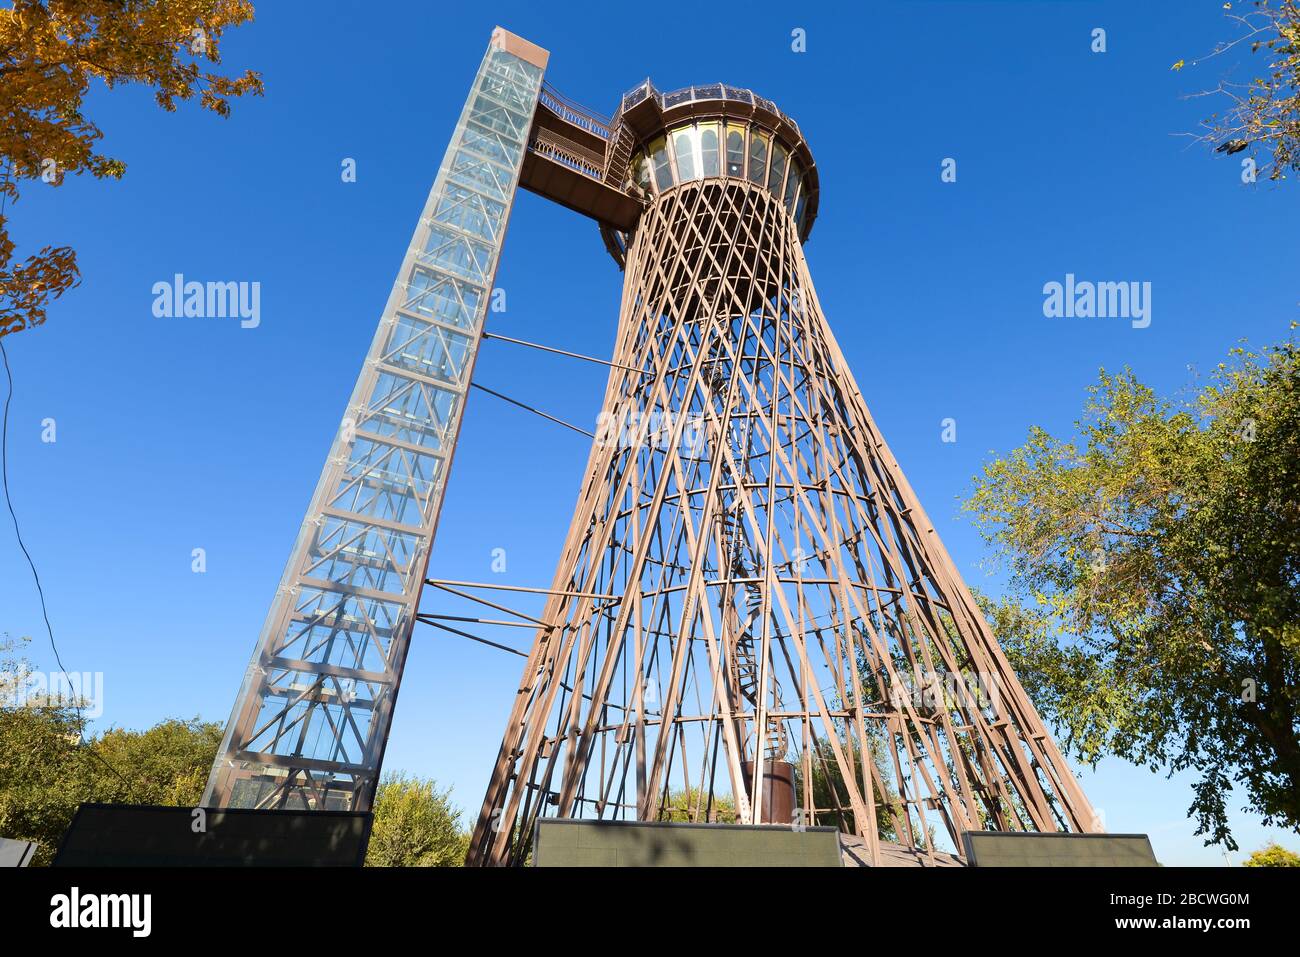 Shukhov Tower in Bukhara, Uzbekistan. Constructivist architecture from the Soviet Union times. Access to the top by the modern lift for tourists. Stock Photo